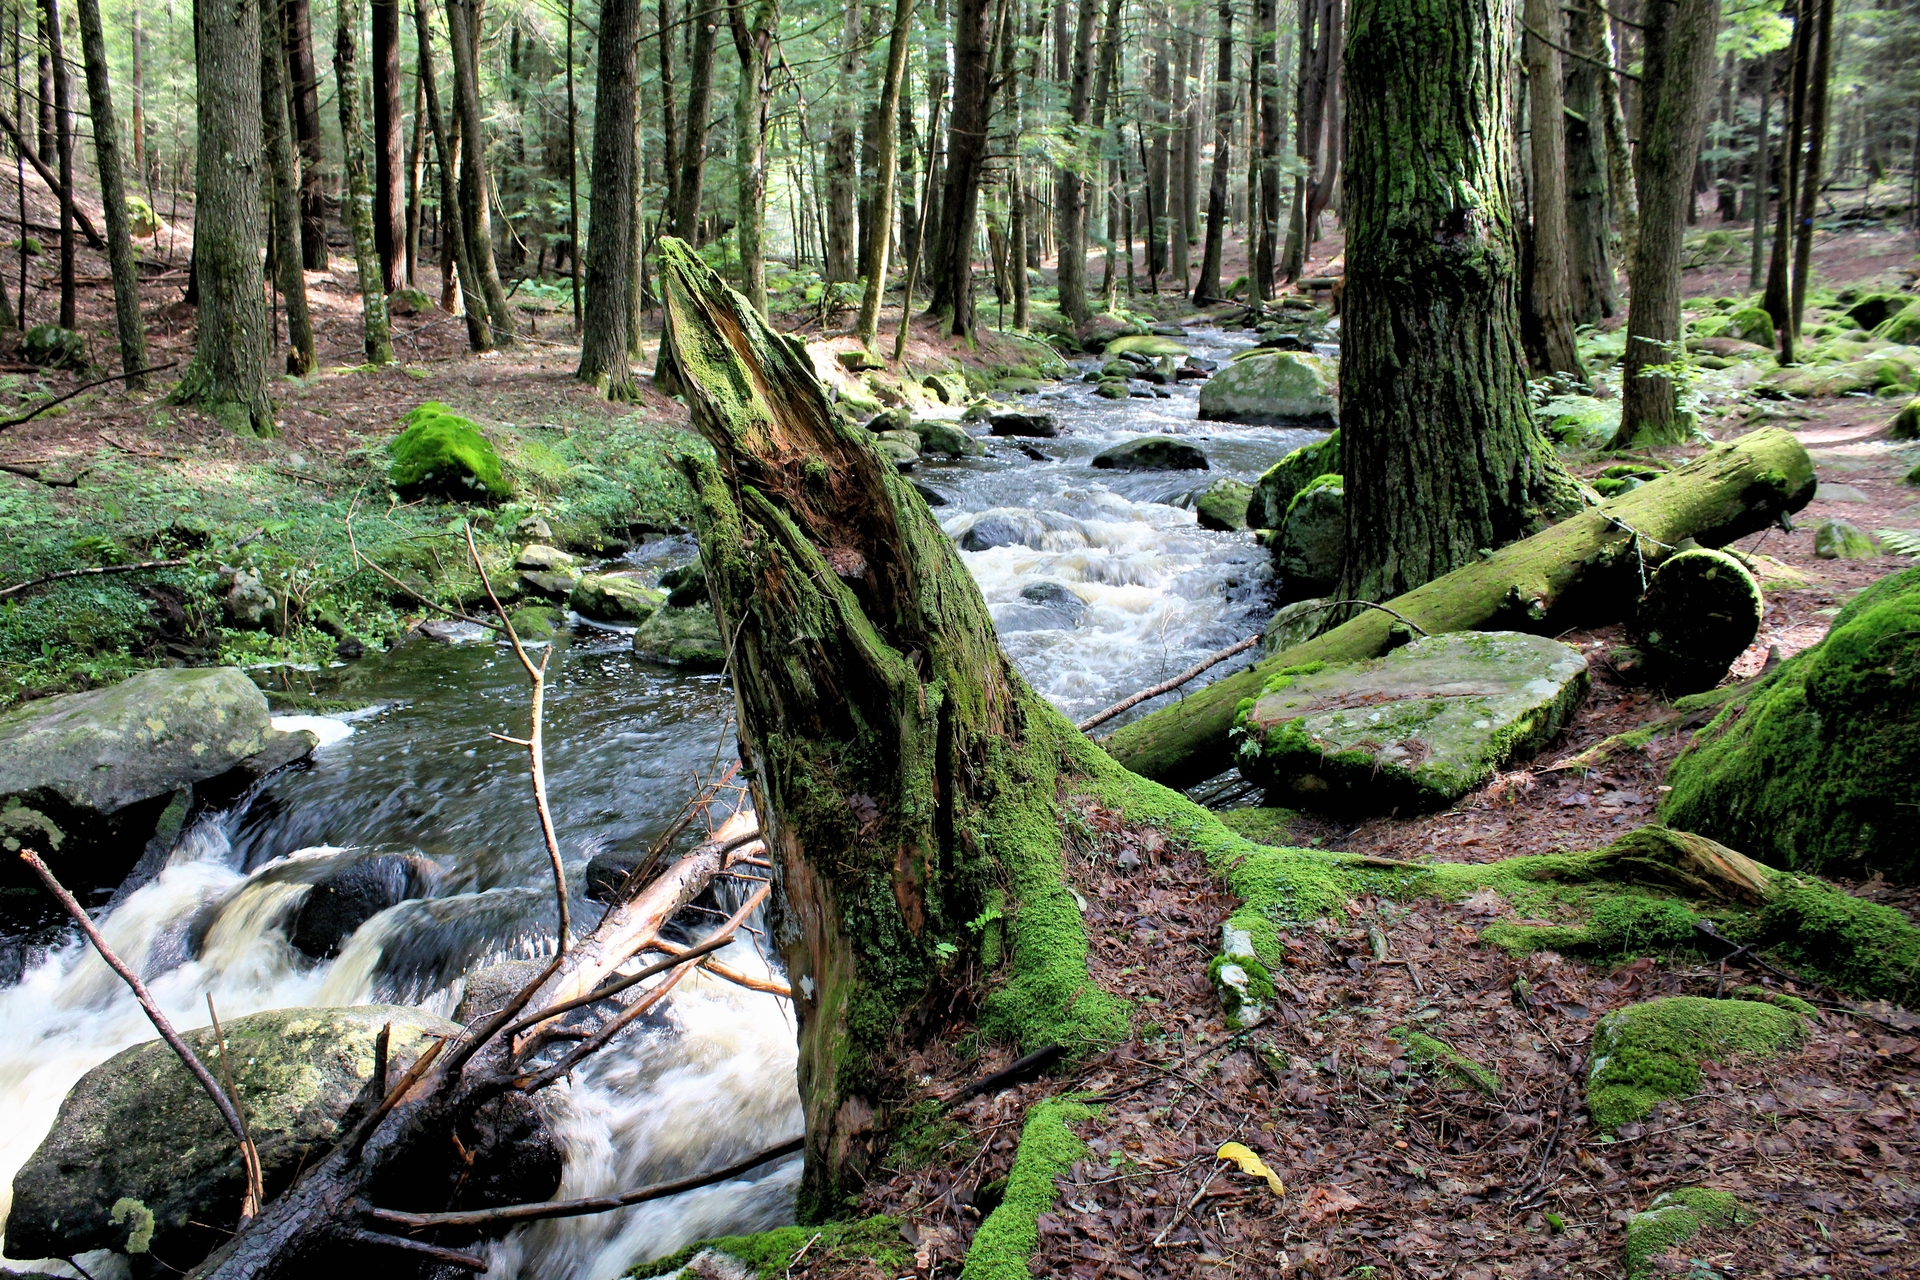 Rushing, rocky brook in a forest. Mossy trees and tree stumps on the banks.